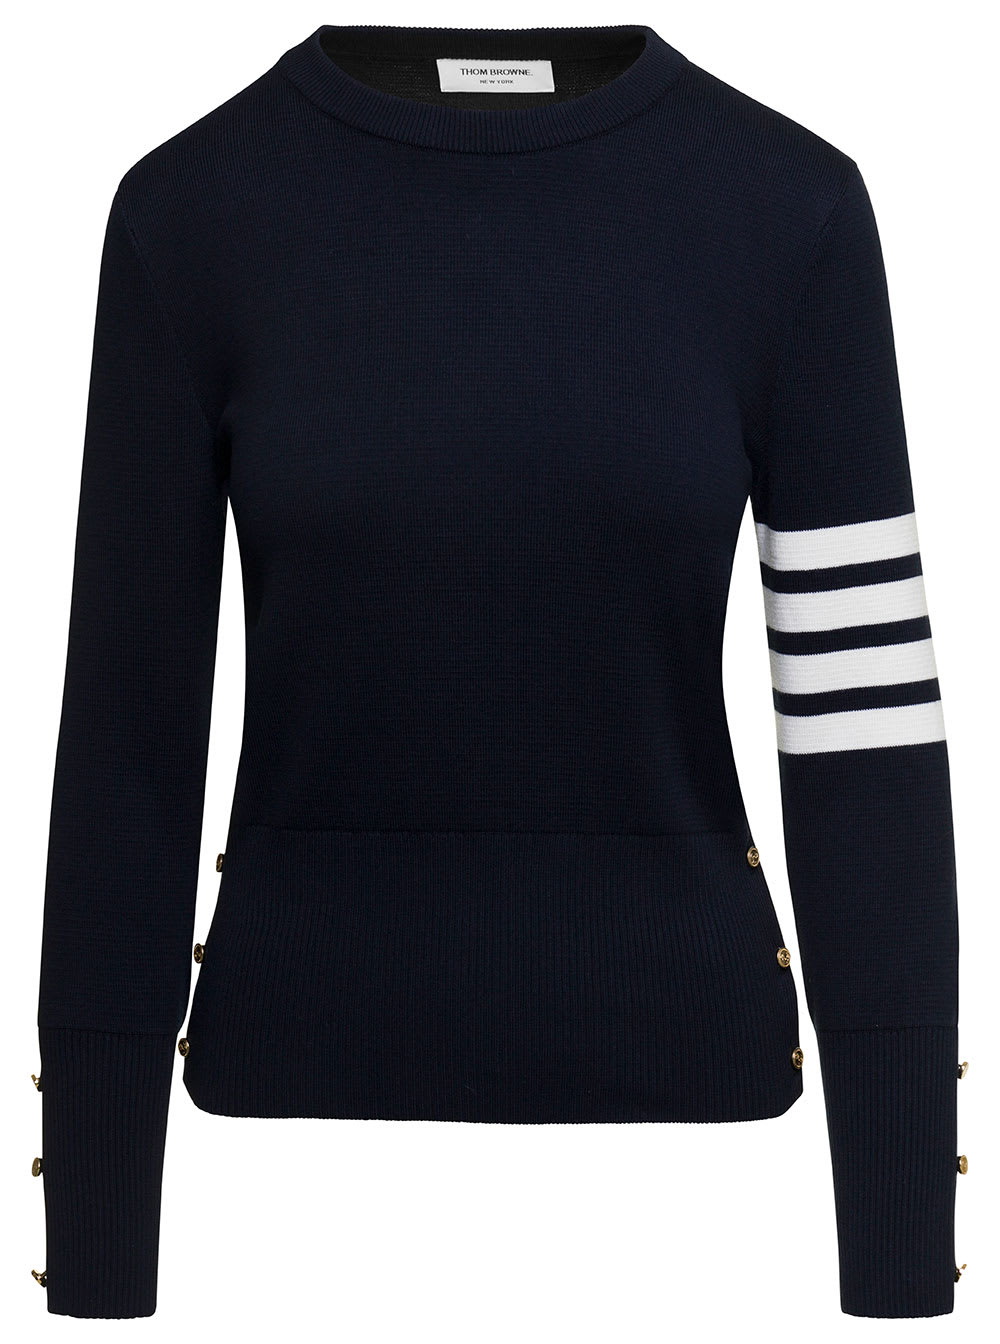 THOM BROWNE MILANO SWEATER WITH FOUR BAR DETAILING IN BLUE COTTON WOMAN